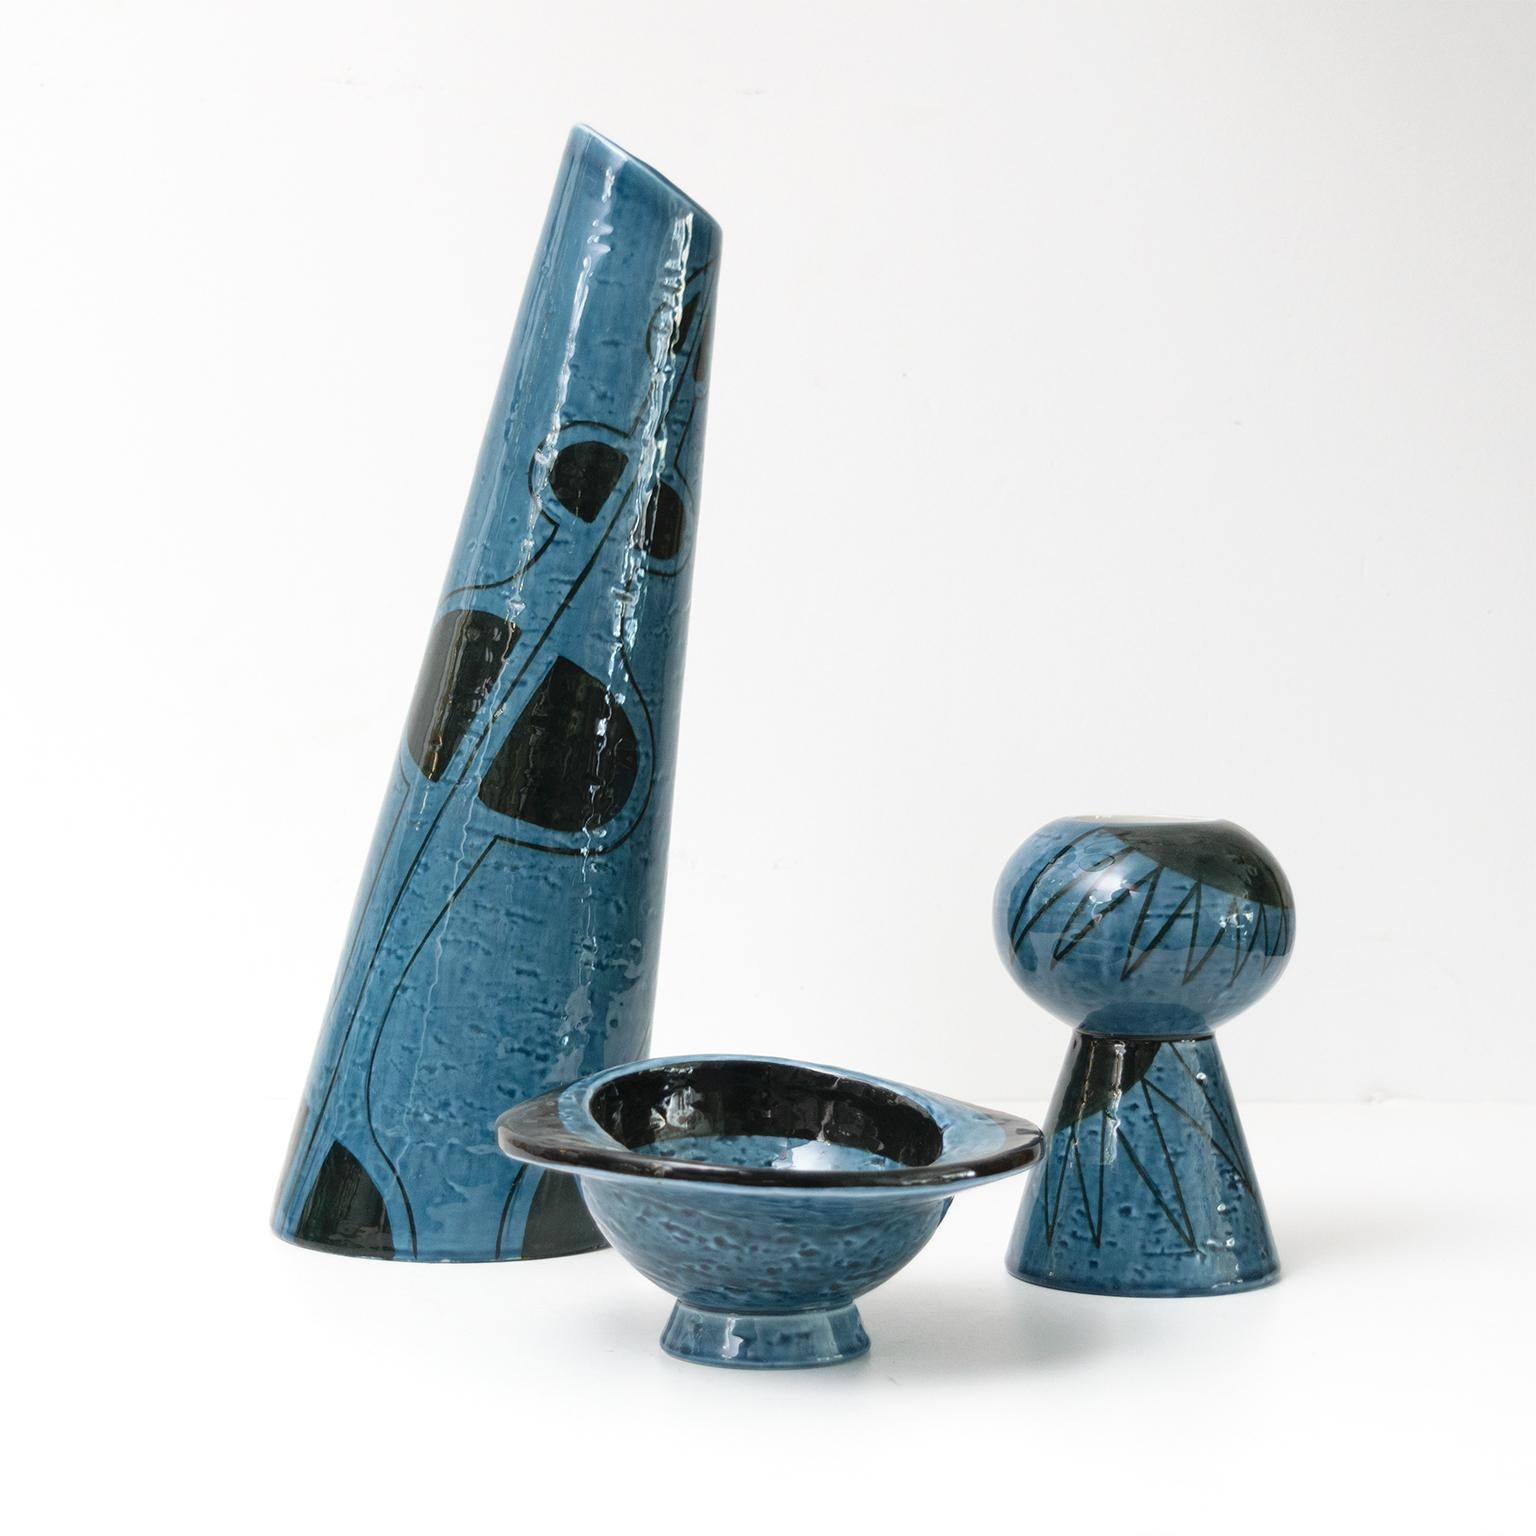 Vilhelm Berke Petersen group of 3 Rorstrand ceramic pieces in black and blue with abstract designs. Made at Rorstrand, Sweden 1950's.

Petersen studied under artists Paul Klee and Wassily Kandinsky at Bauhaus Dessau from 1930-1931.